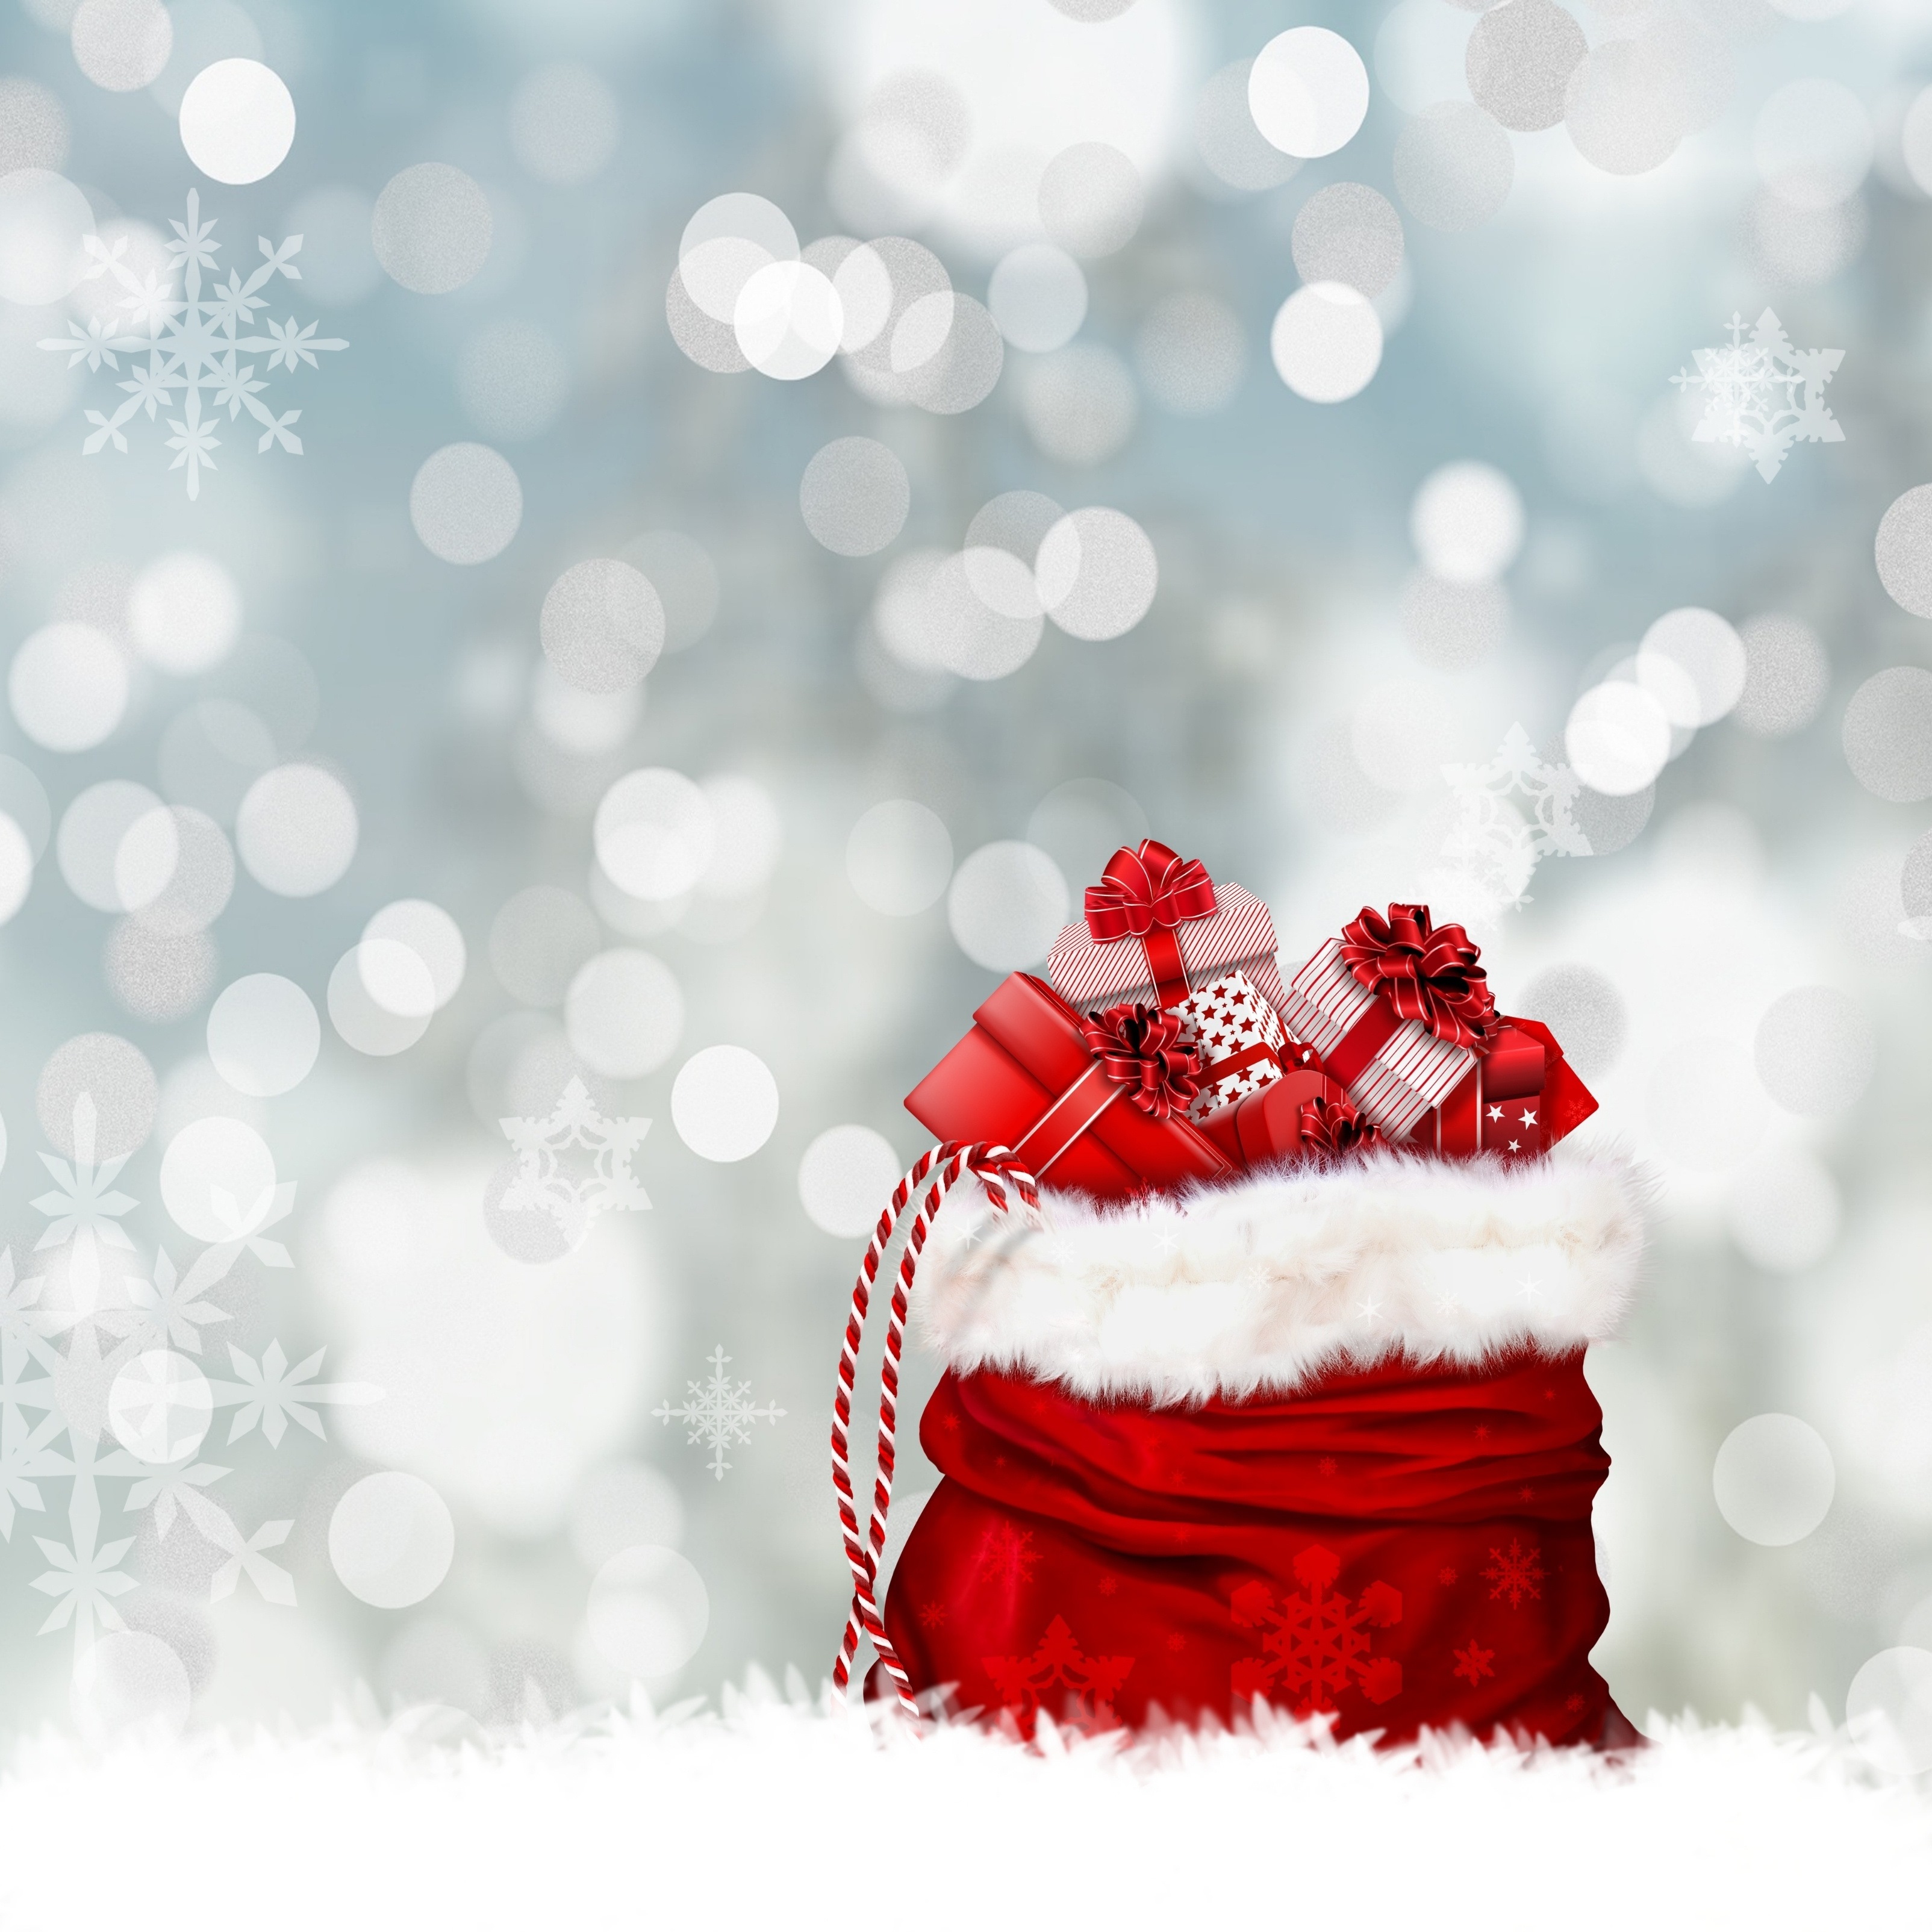 Wallpaper Hd Christmas Wallpapers Backgrounds